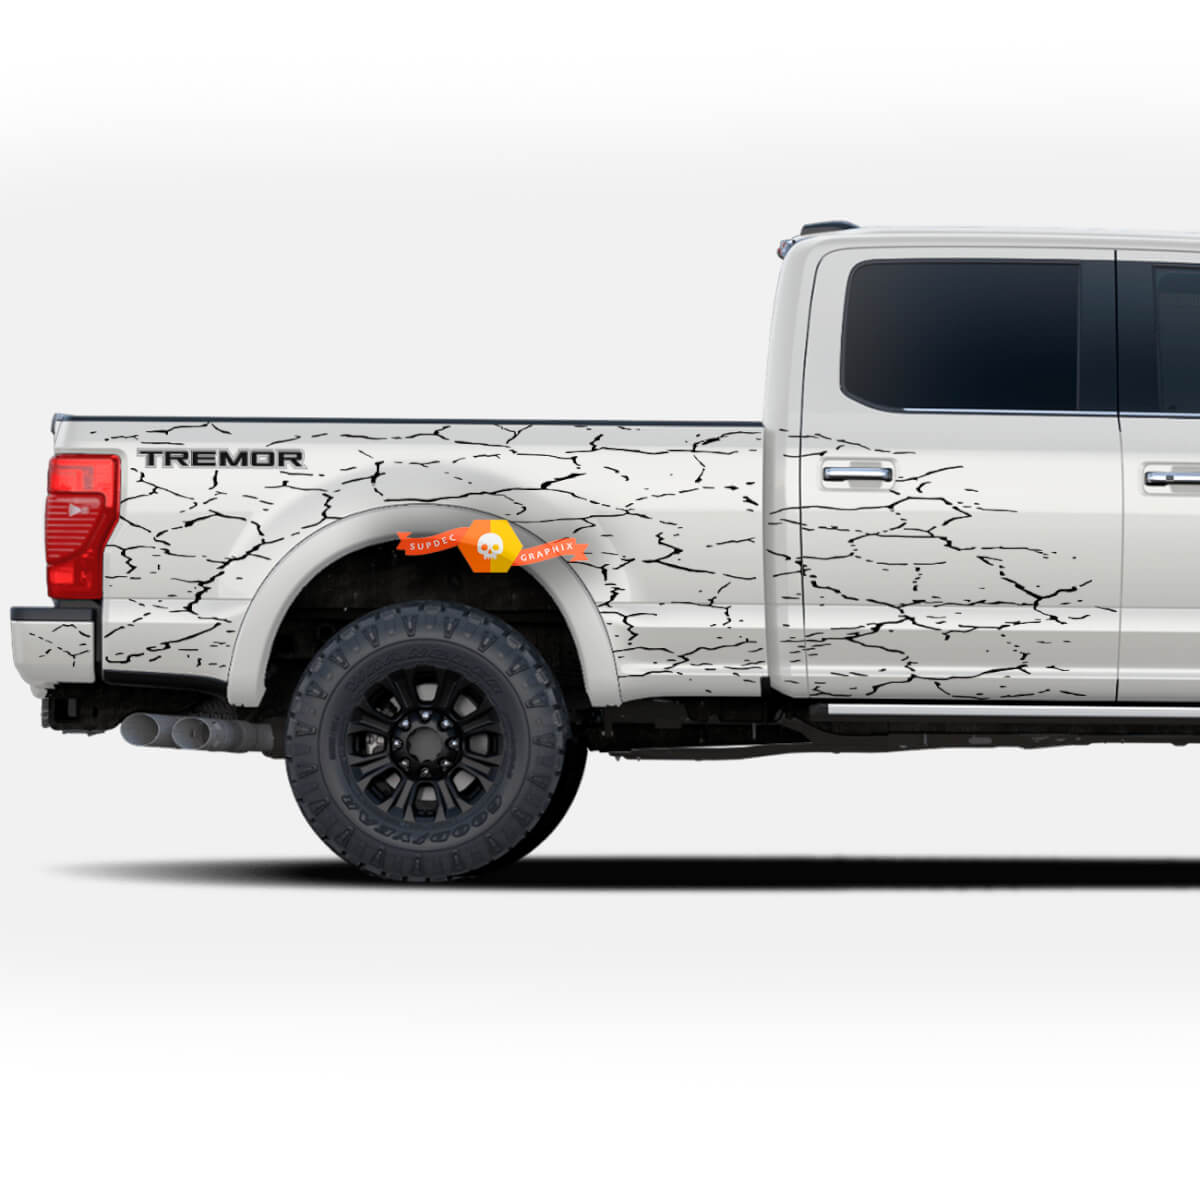 2x Decal for Ford F-150 F-250 F-350 Ford Super Duty Tremor Splash Wrap Stickers Truck Bed Side
